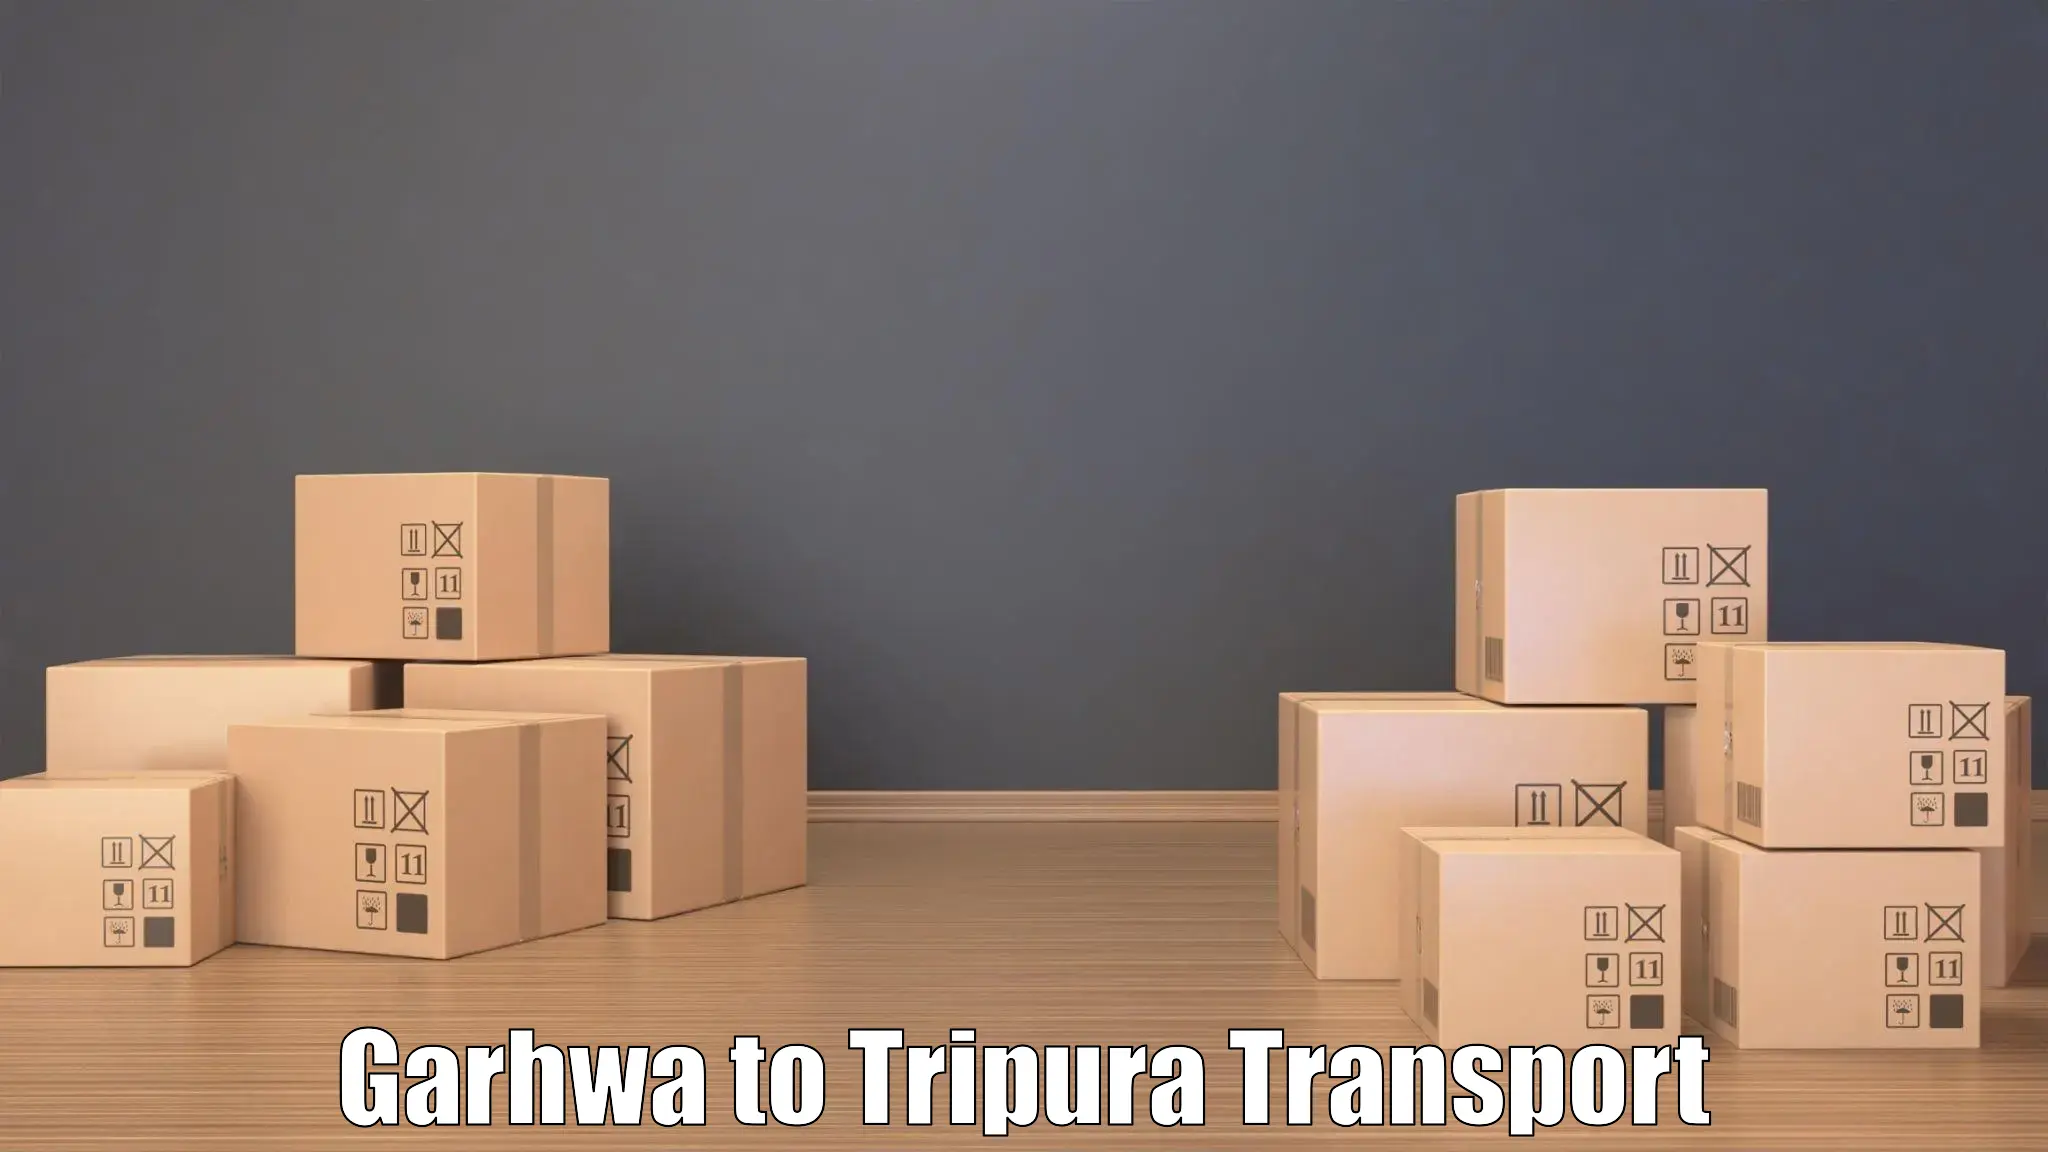 Commercial transport service Garhwa to Udaipur Tripura